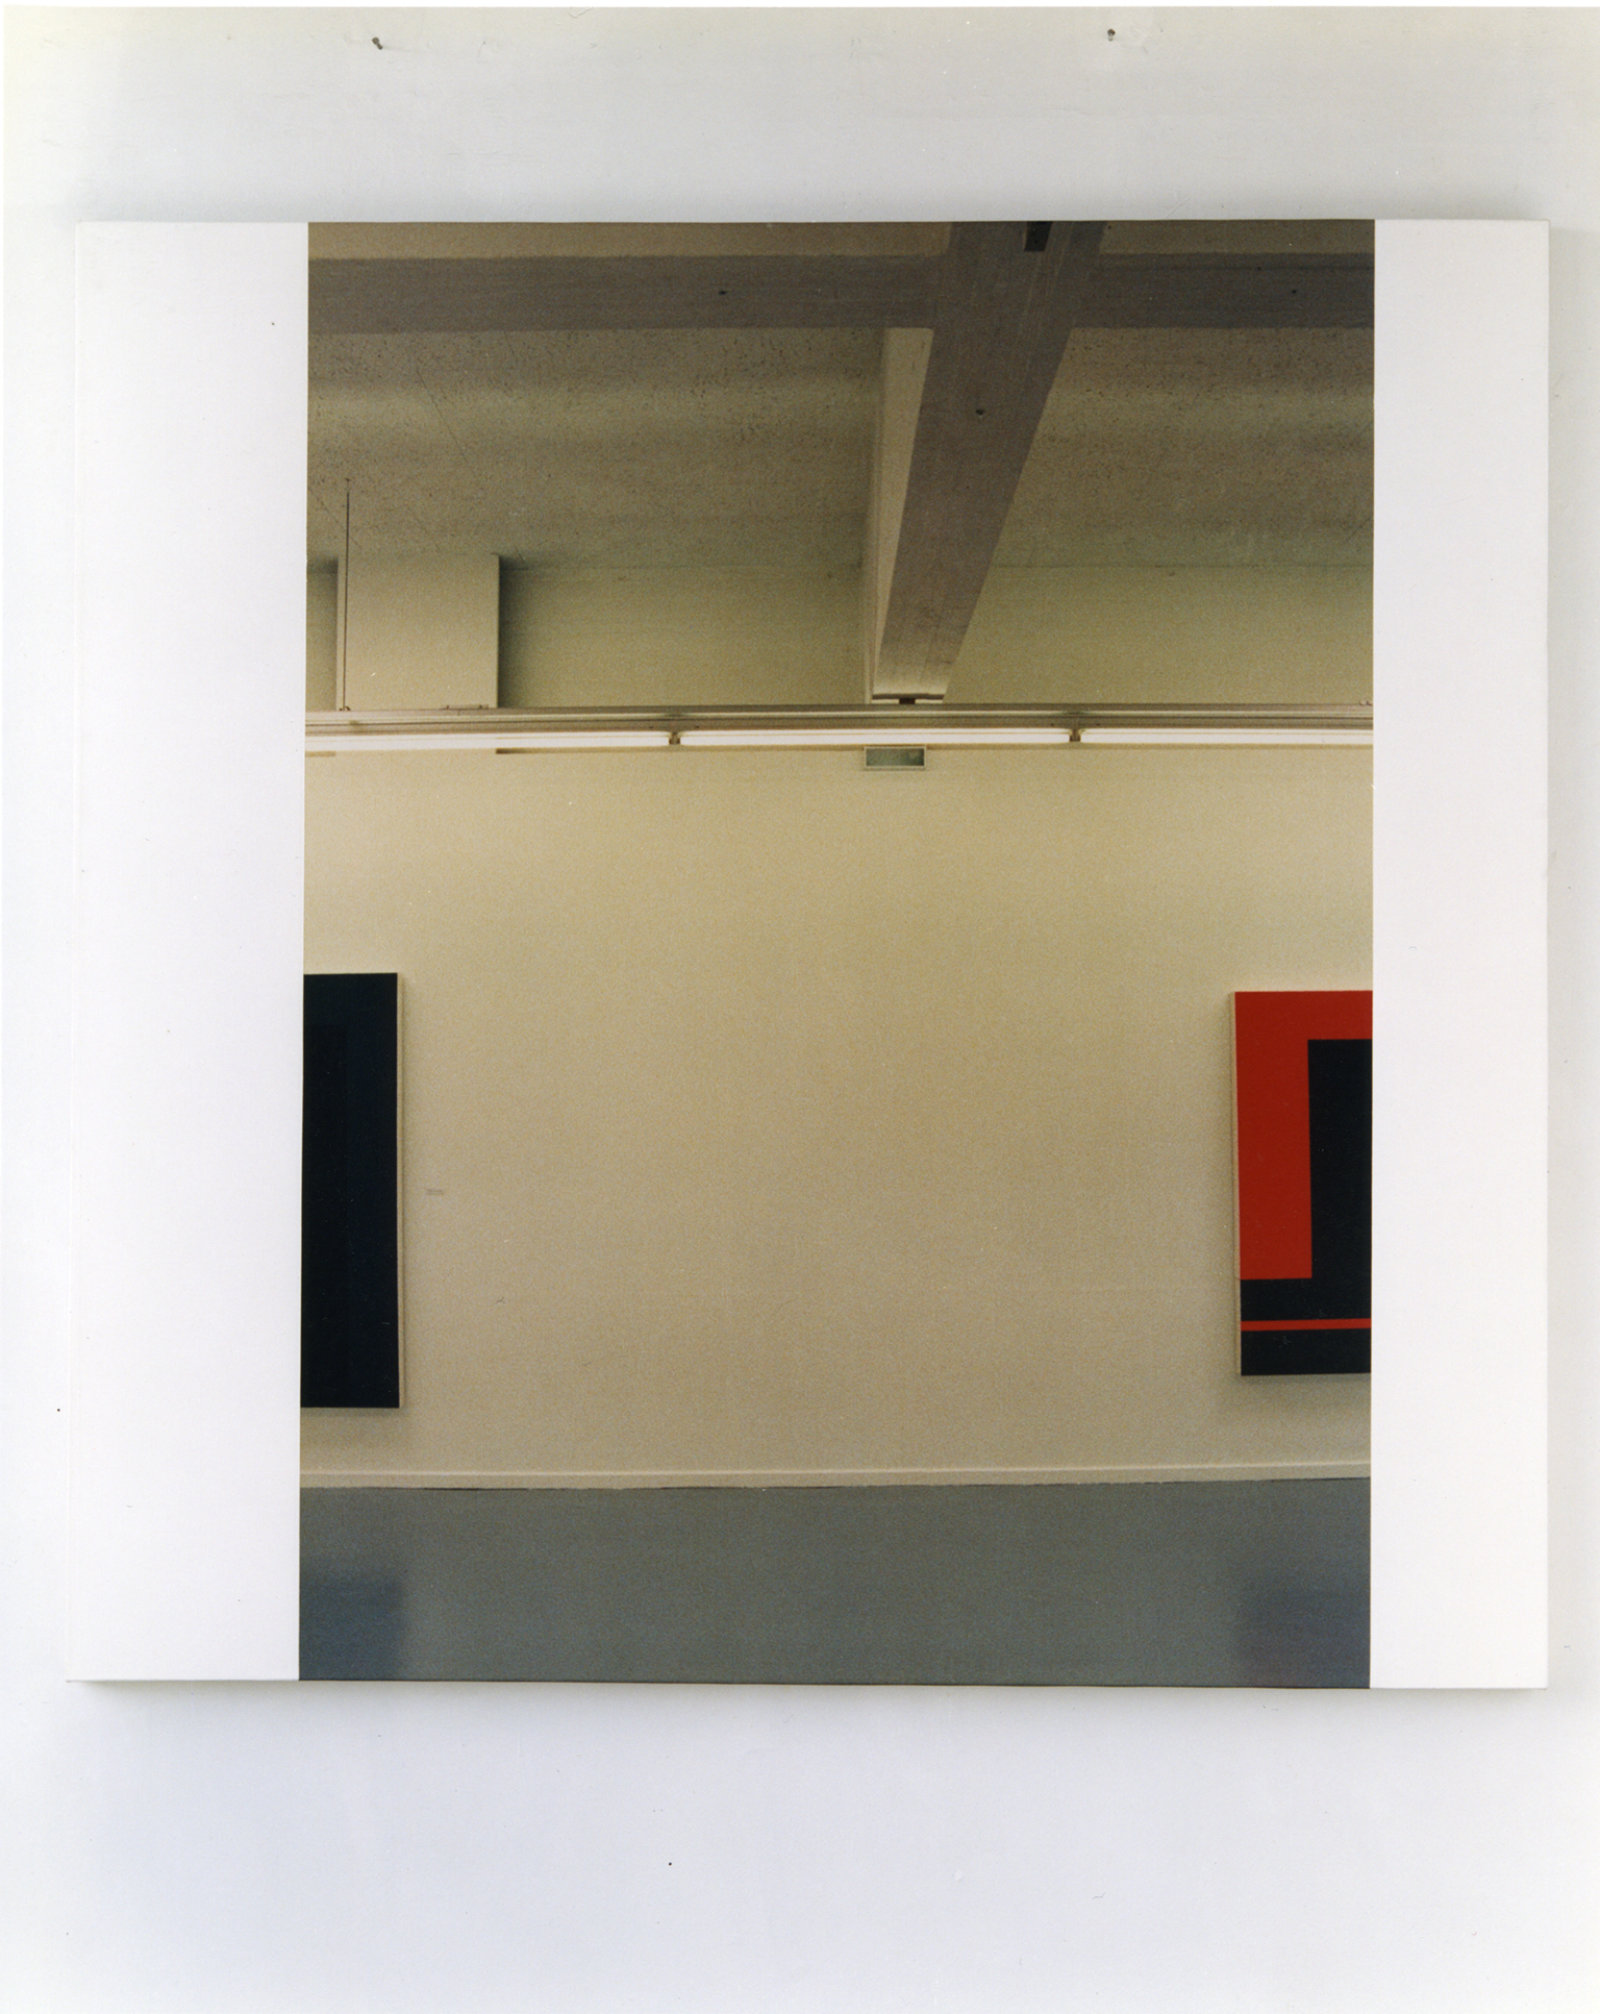 Ian Wallace, In The Museum (Peter Halley Series III), 1989, photolaminate and acrylic on canvas, 60 x 60 in. (153 x 153 cm)